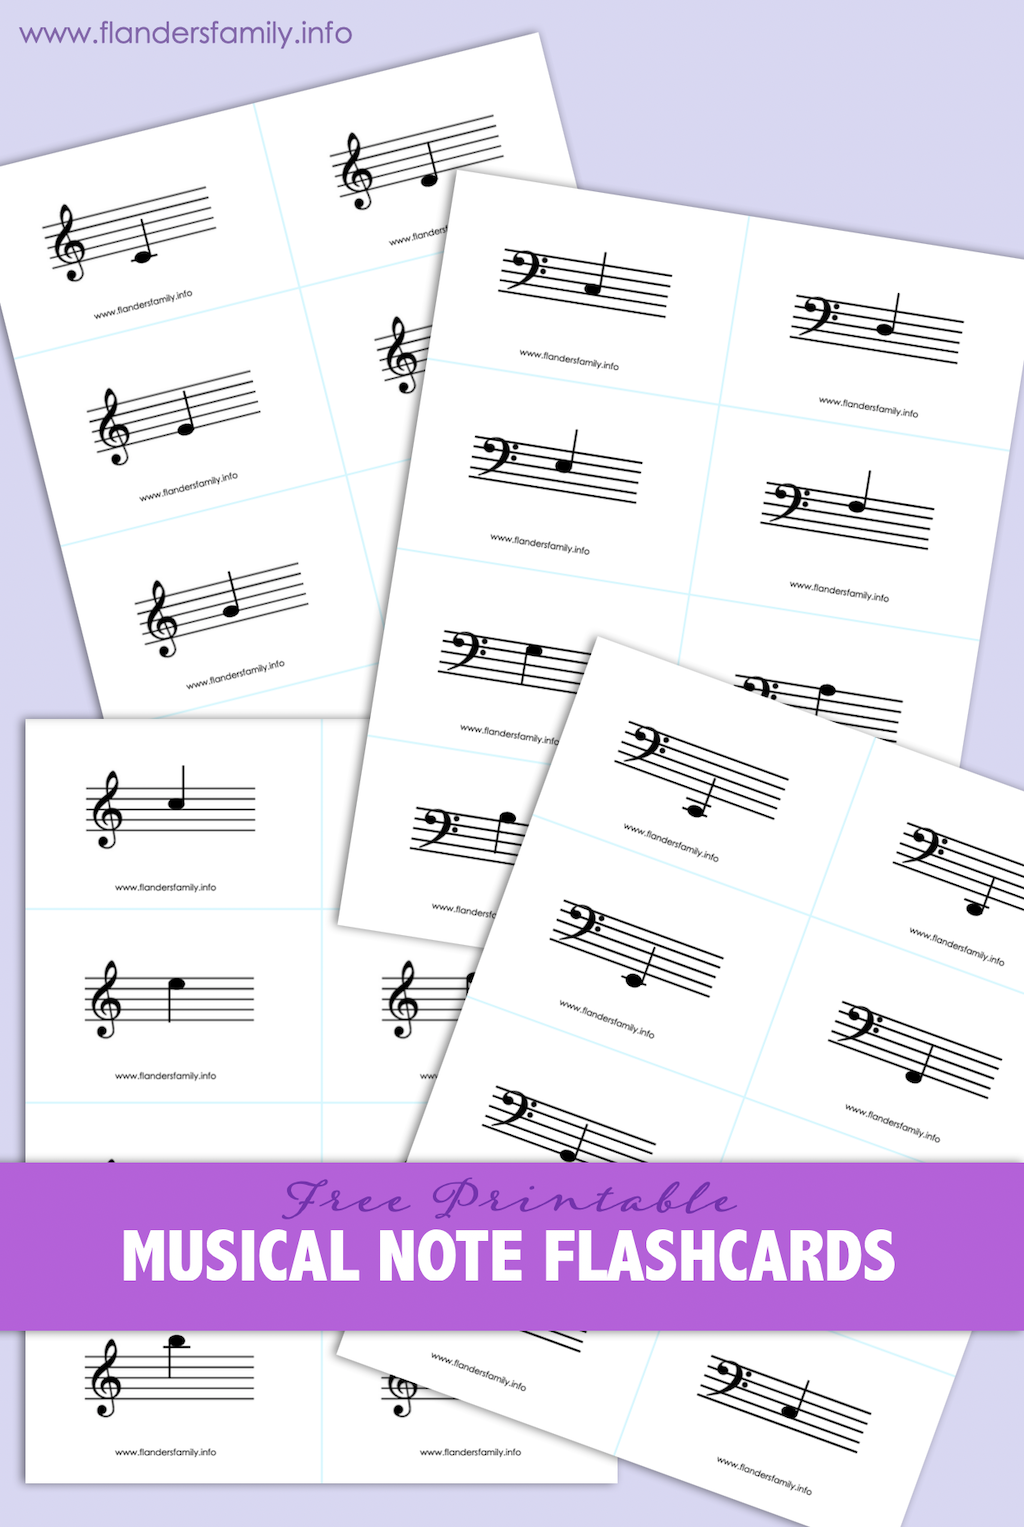 Musical Note Flashcards